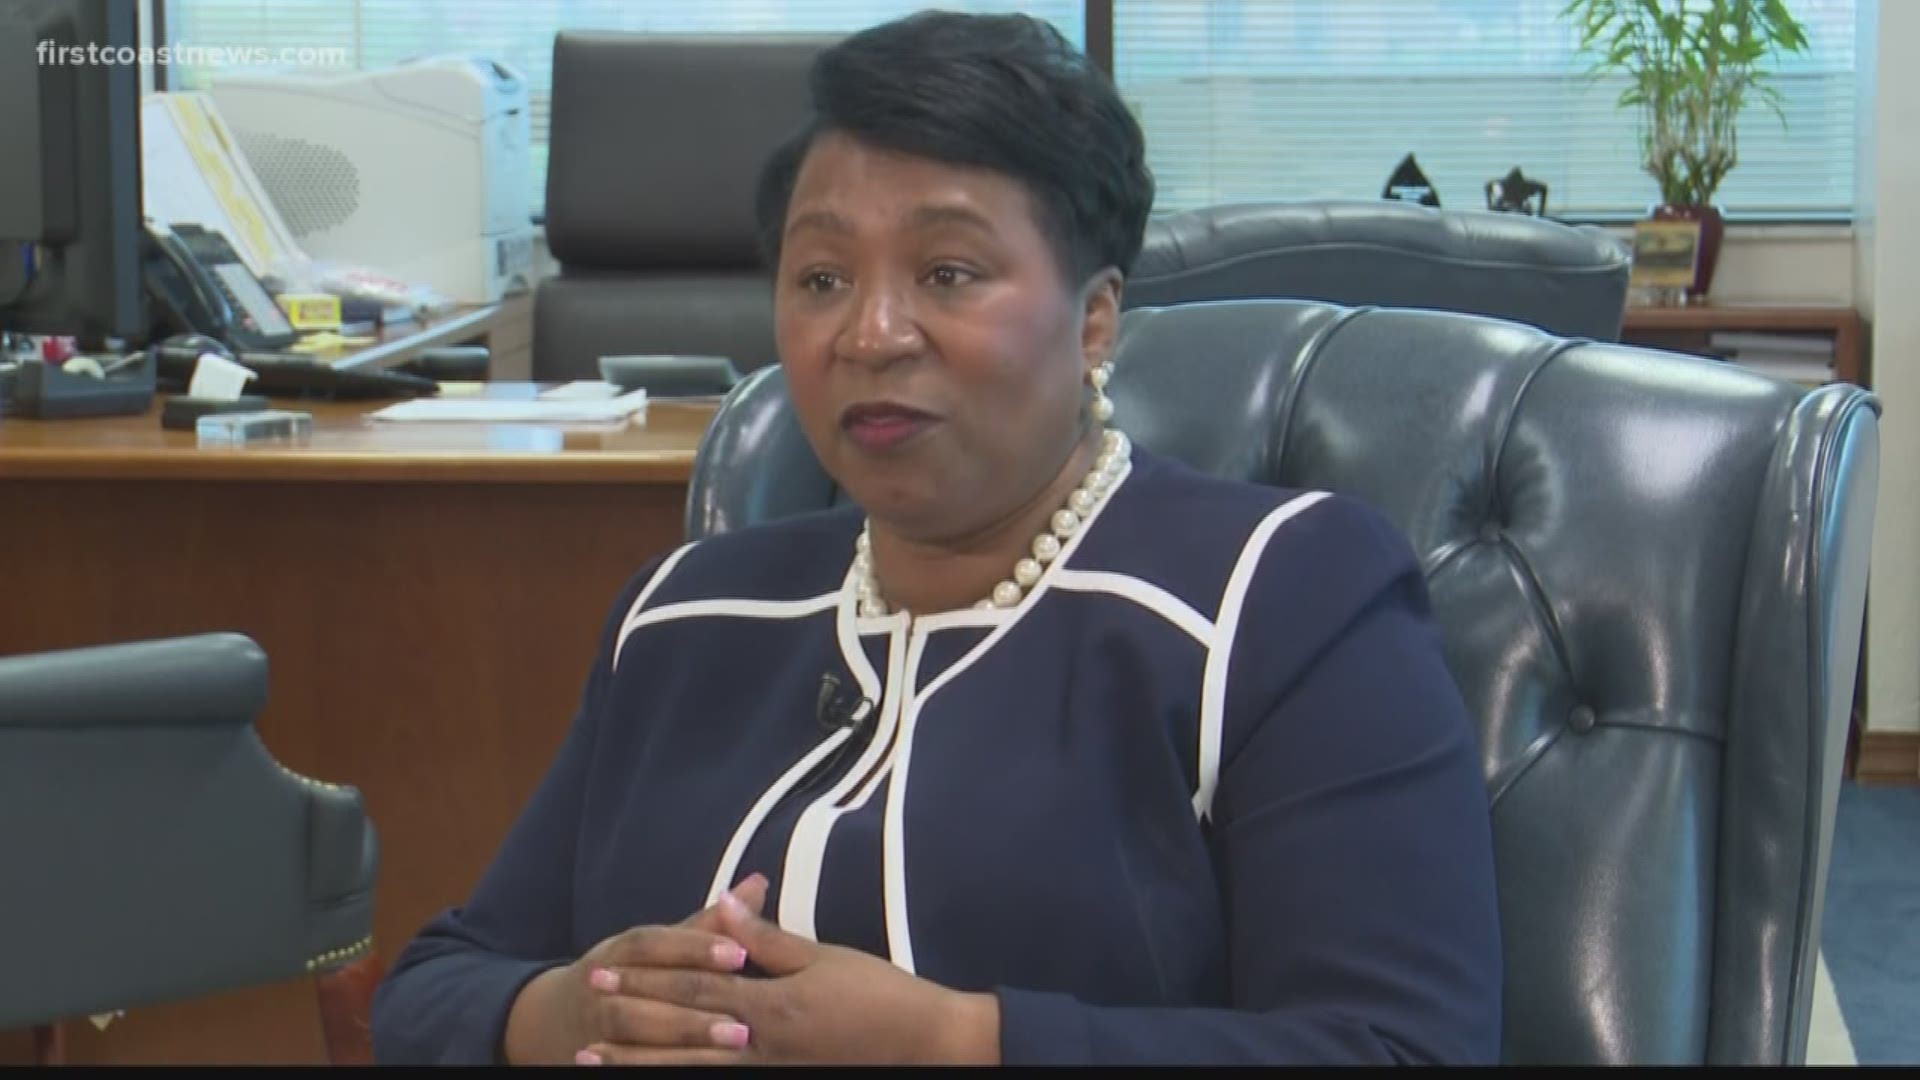 The Duval County School Board made a unanimous decision Thursday approving the contract of Dr. Diana Greene. If she accepts, she will start July 1.